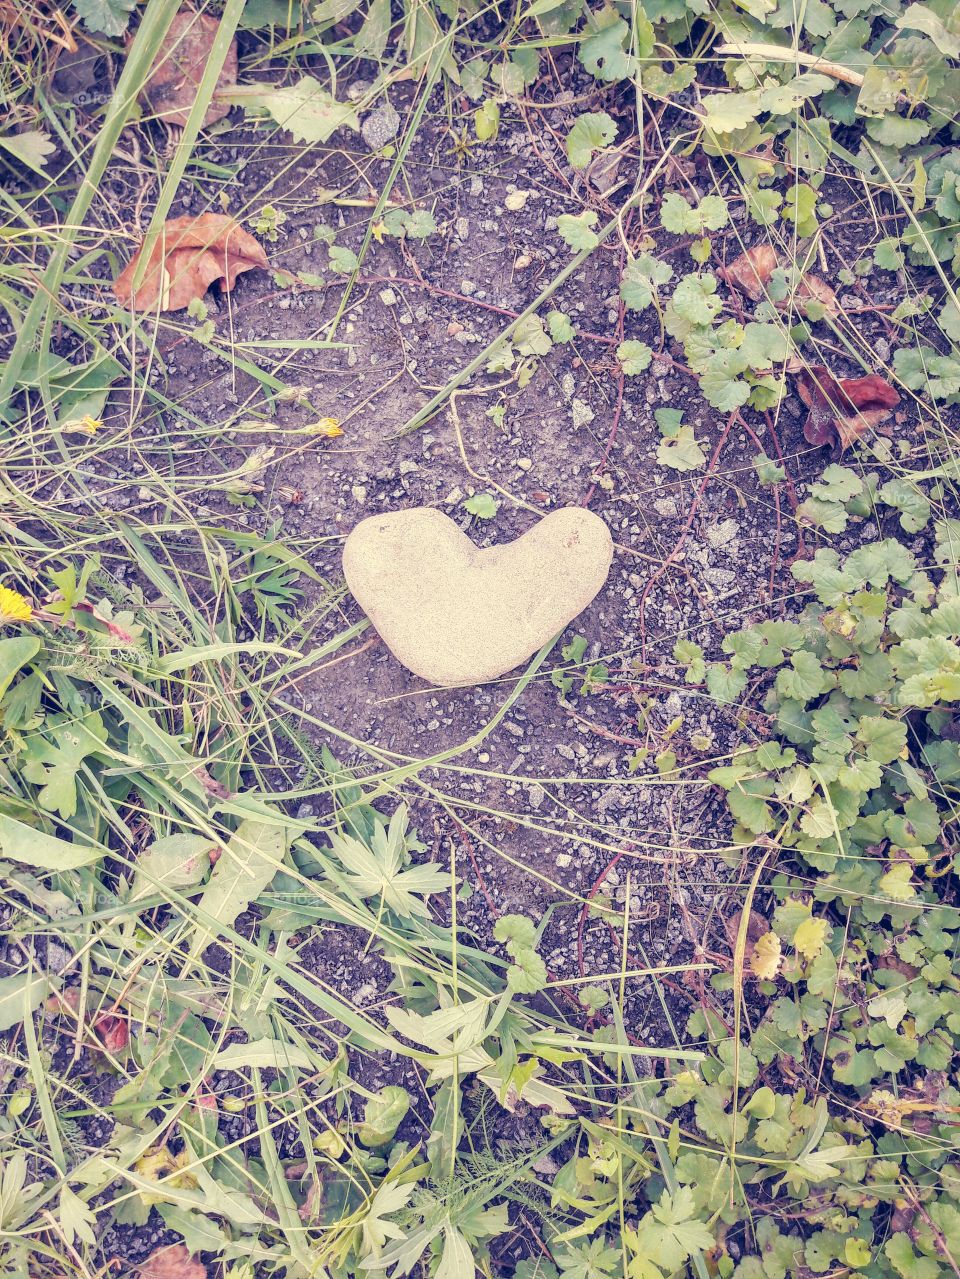 Stone in the shape of a heart in the garden